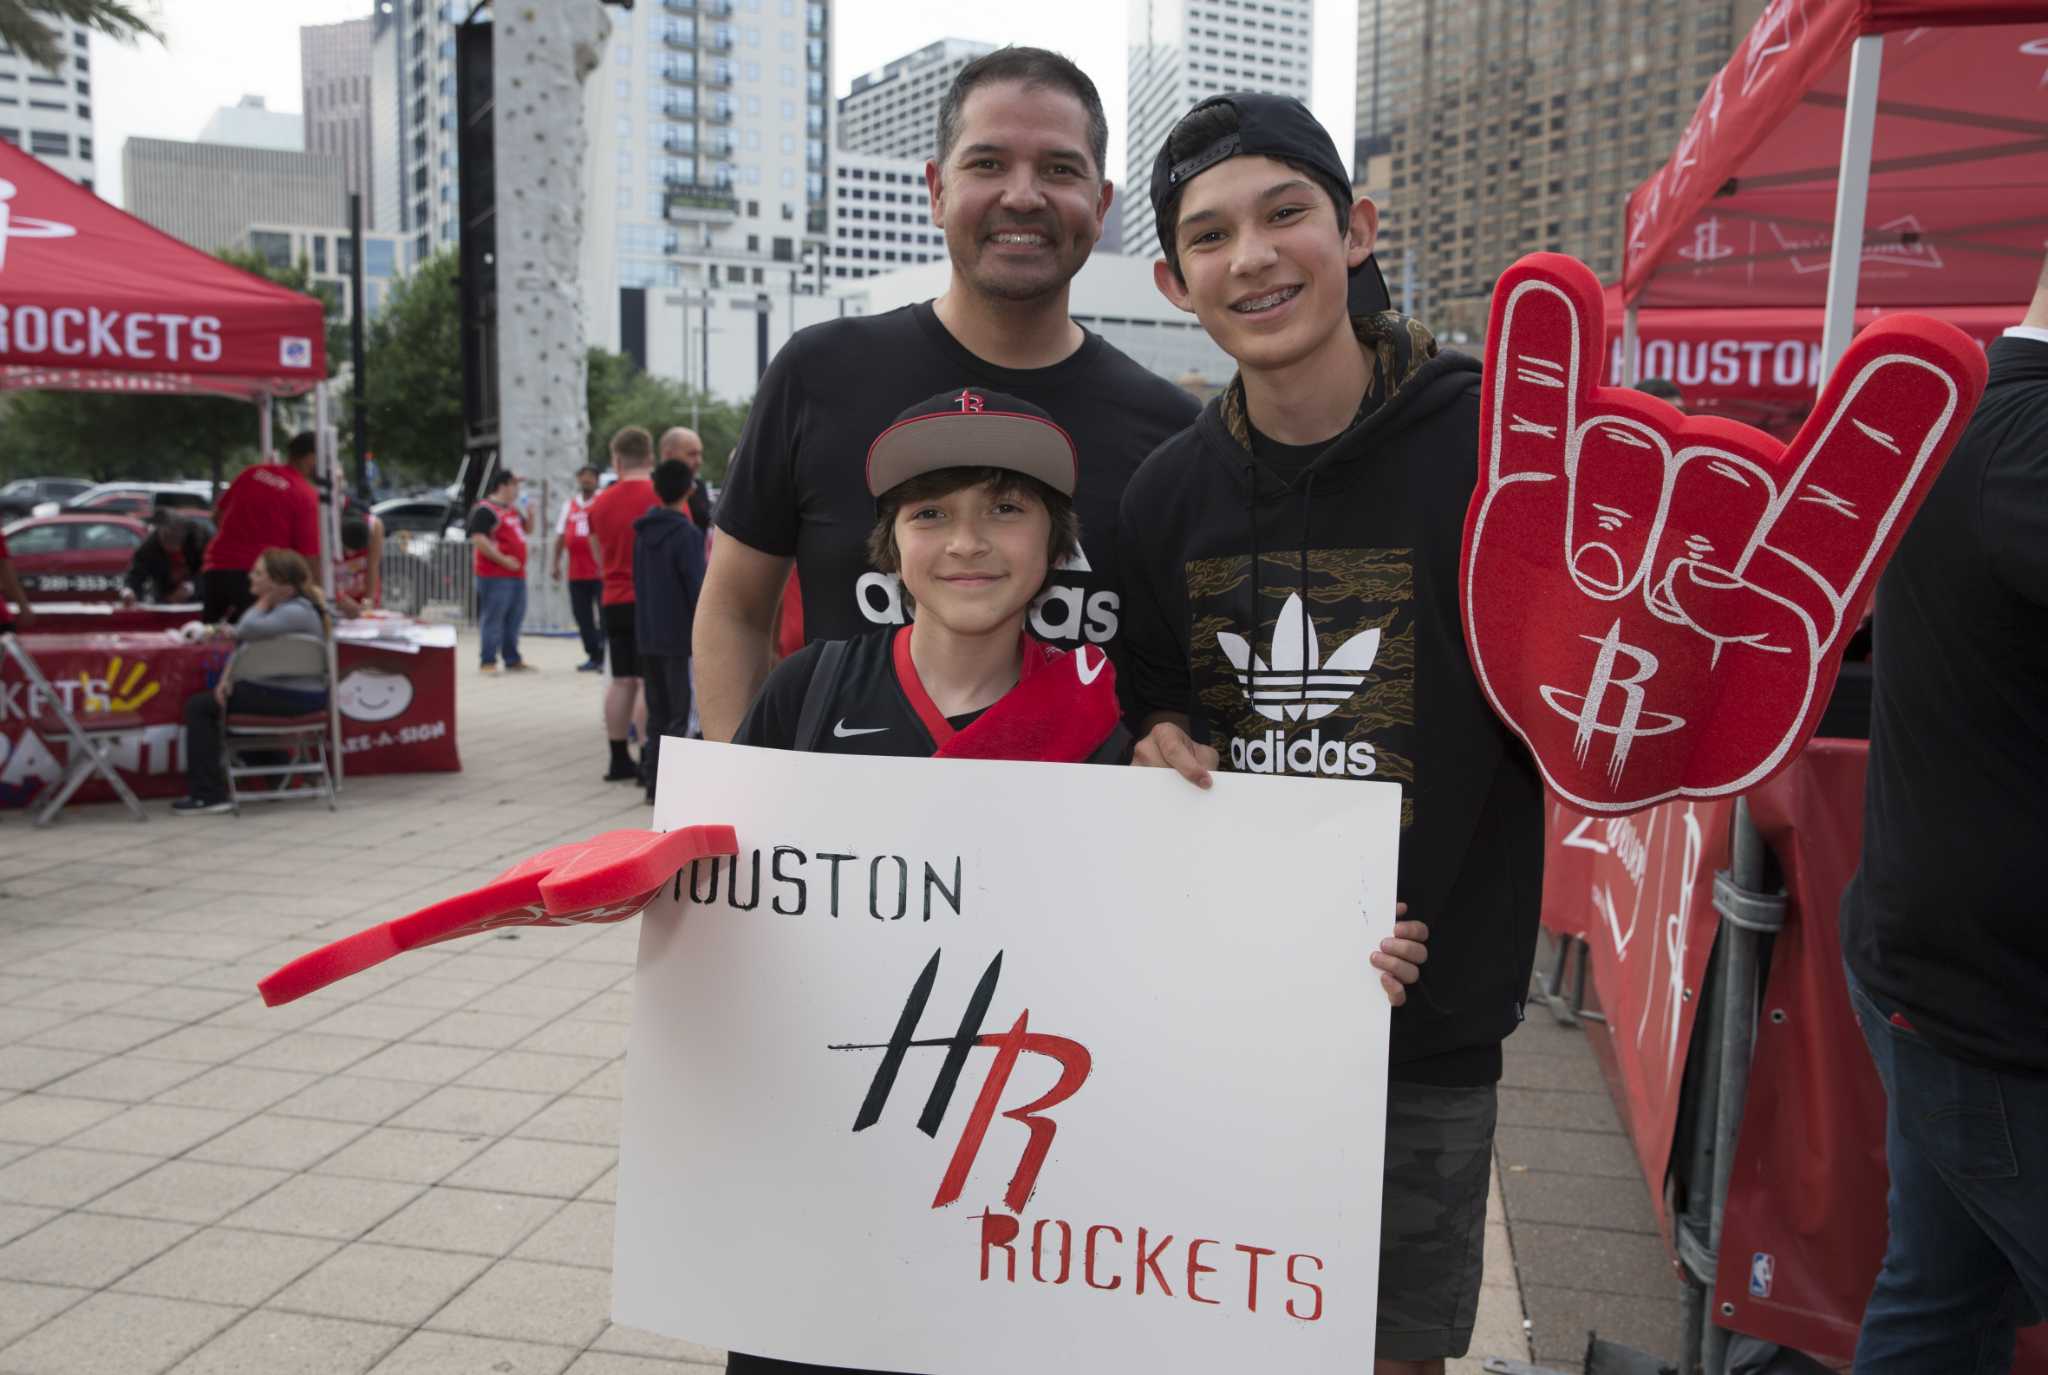 Rockets fans cheer on team in biggest game of season